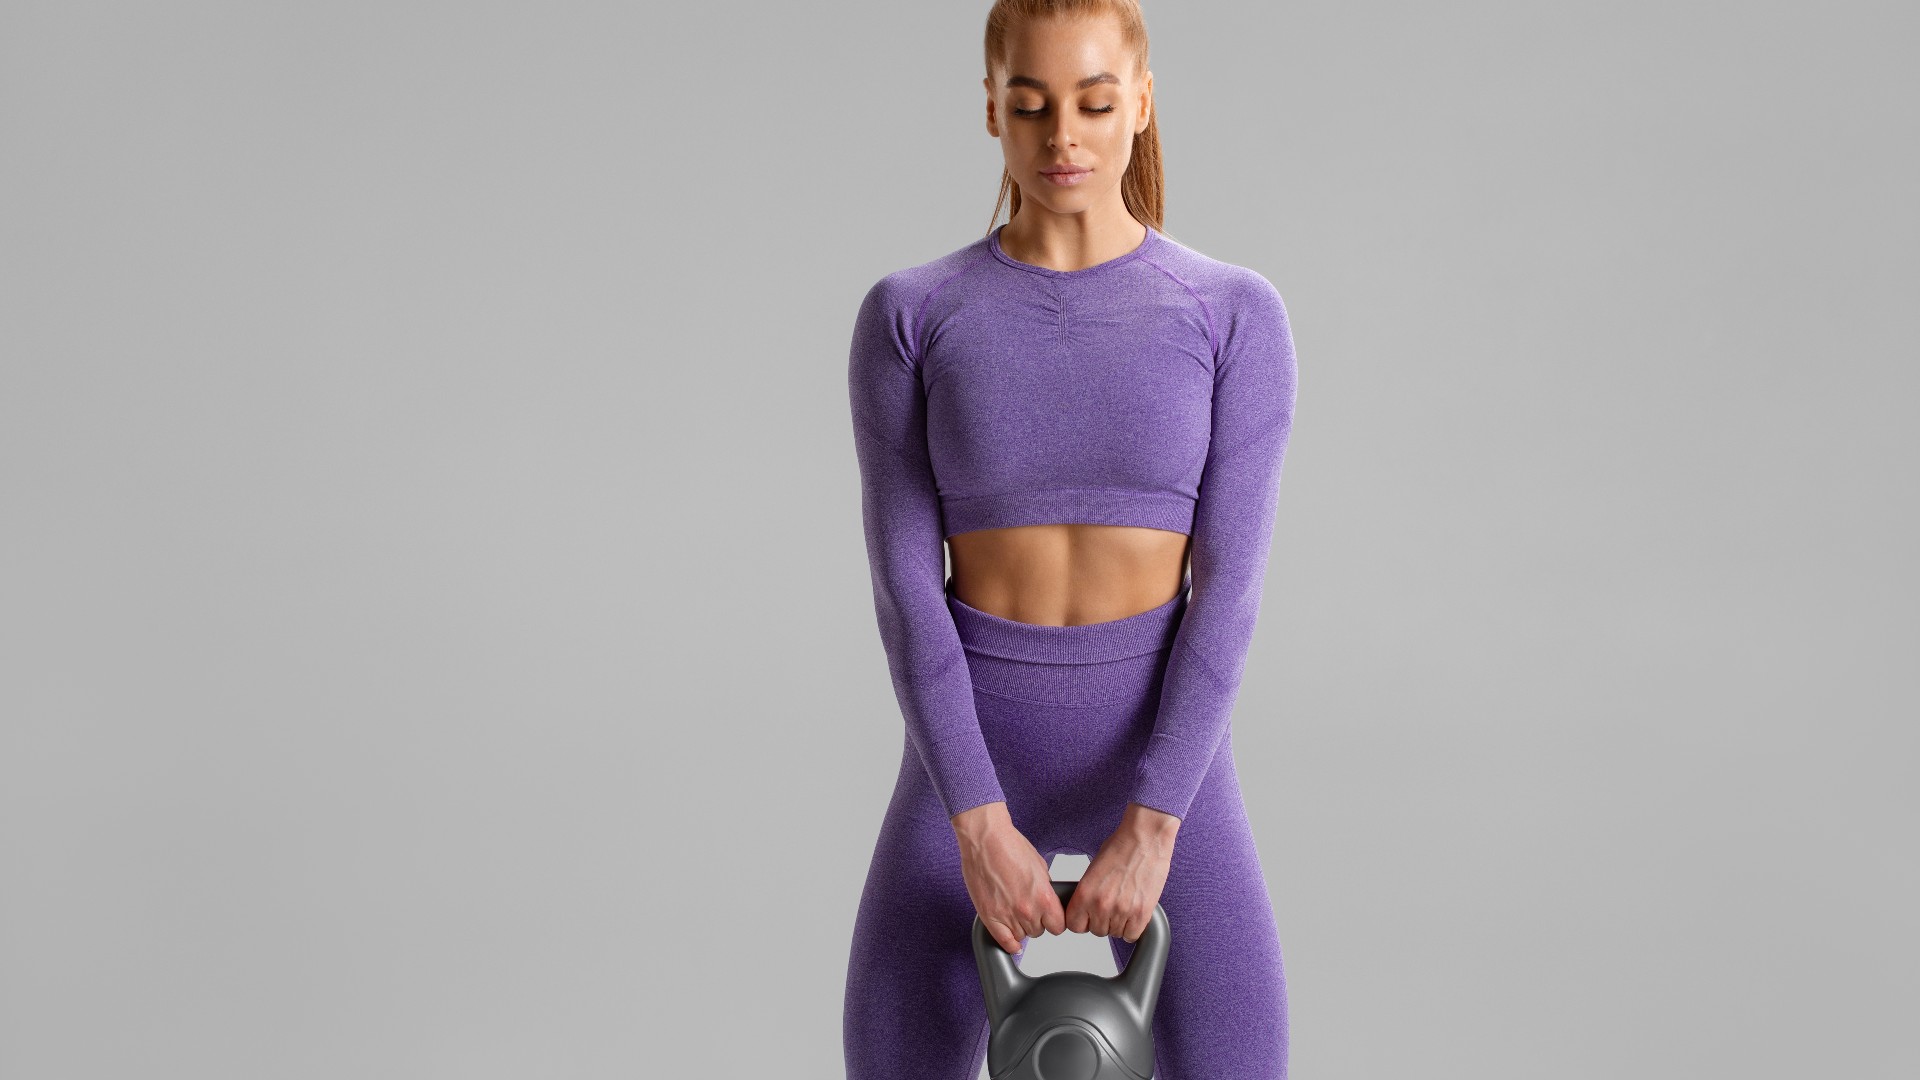 Gym Work Out Waist Trainer Purple - Optimize Your Workout